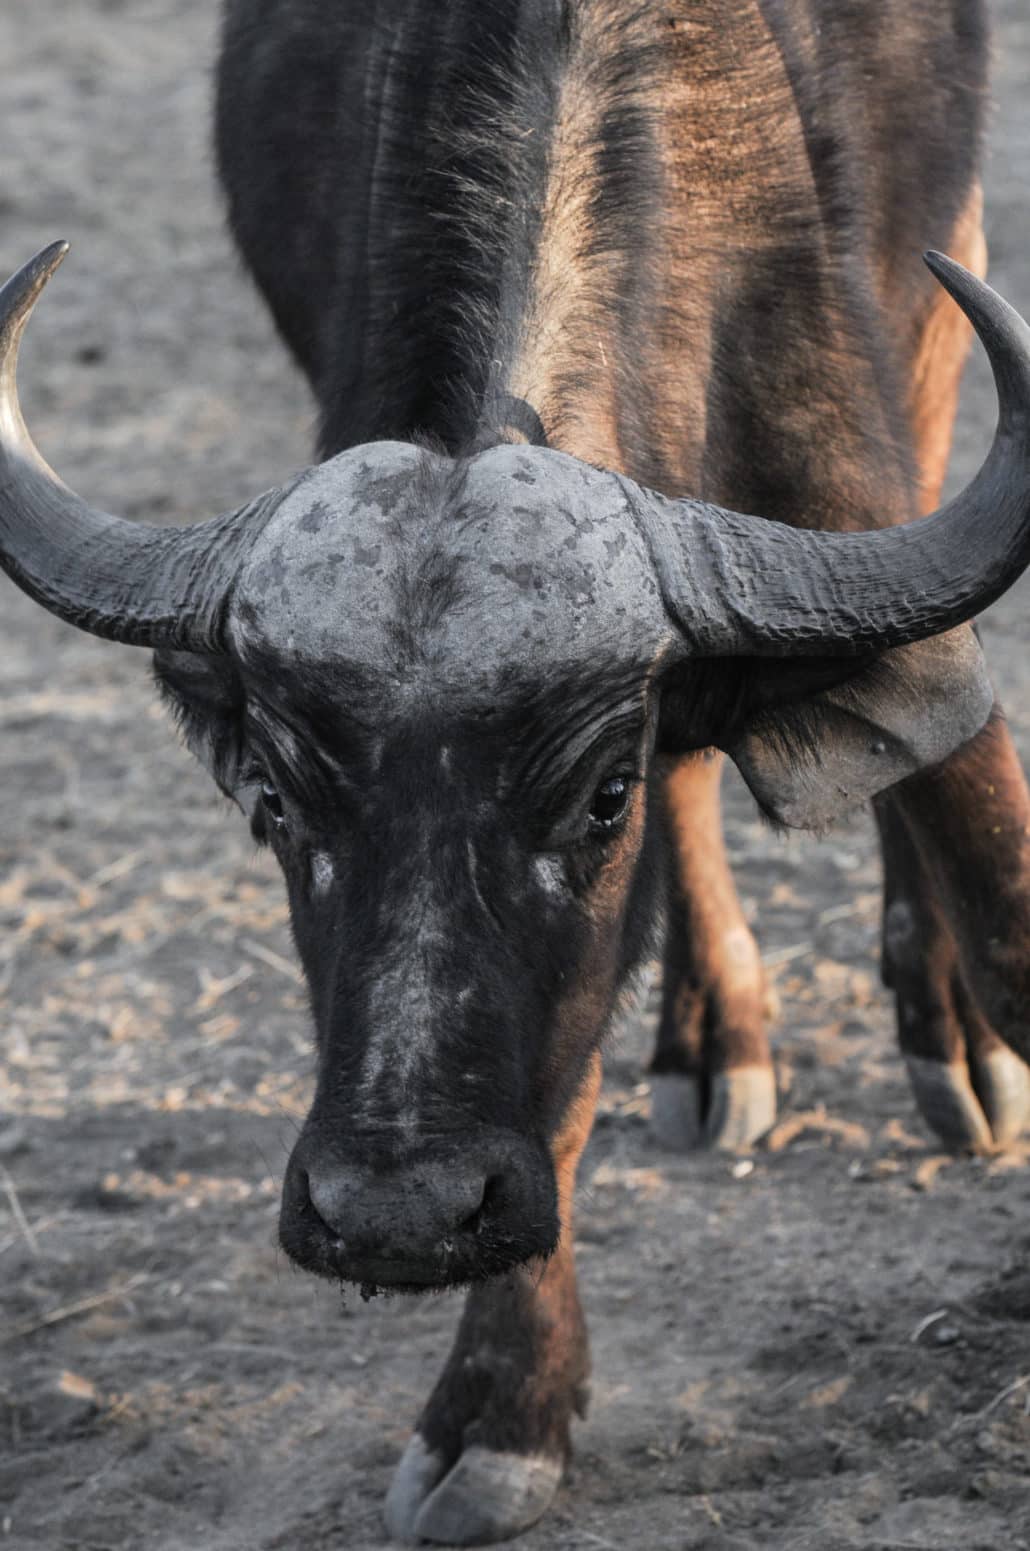 A Cape buffalo with sweet eyes comes close to our car